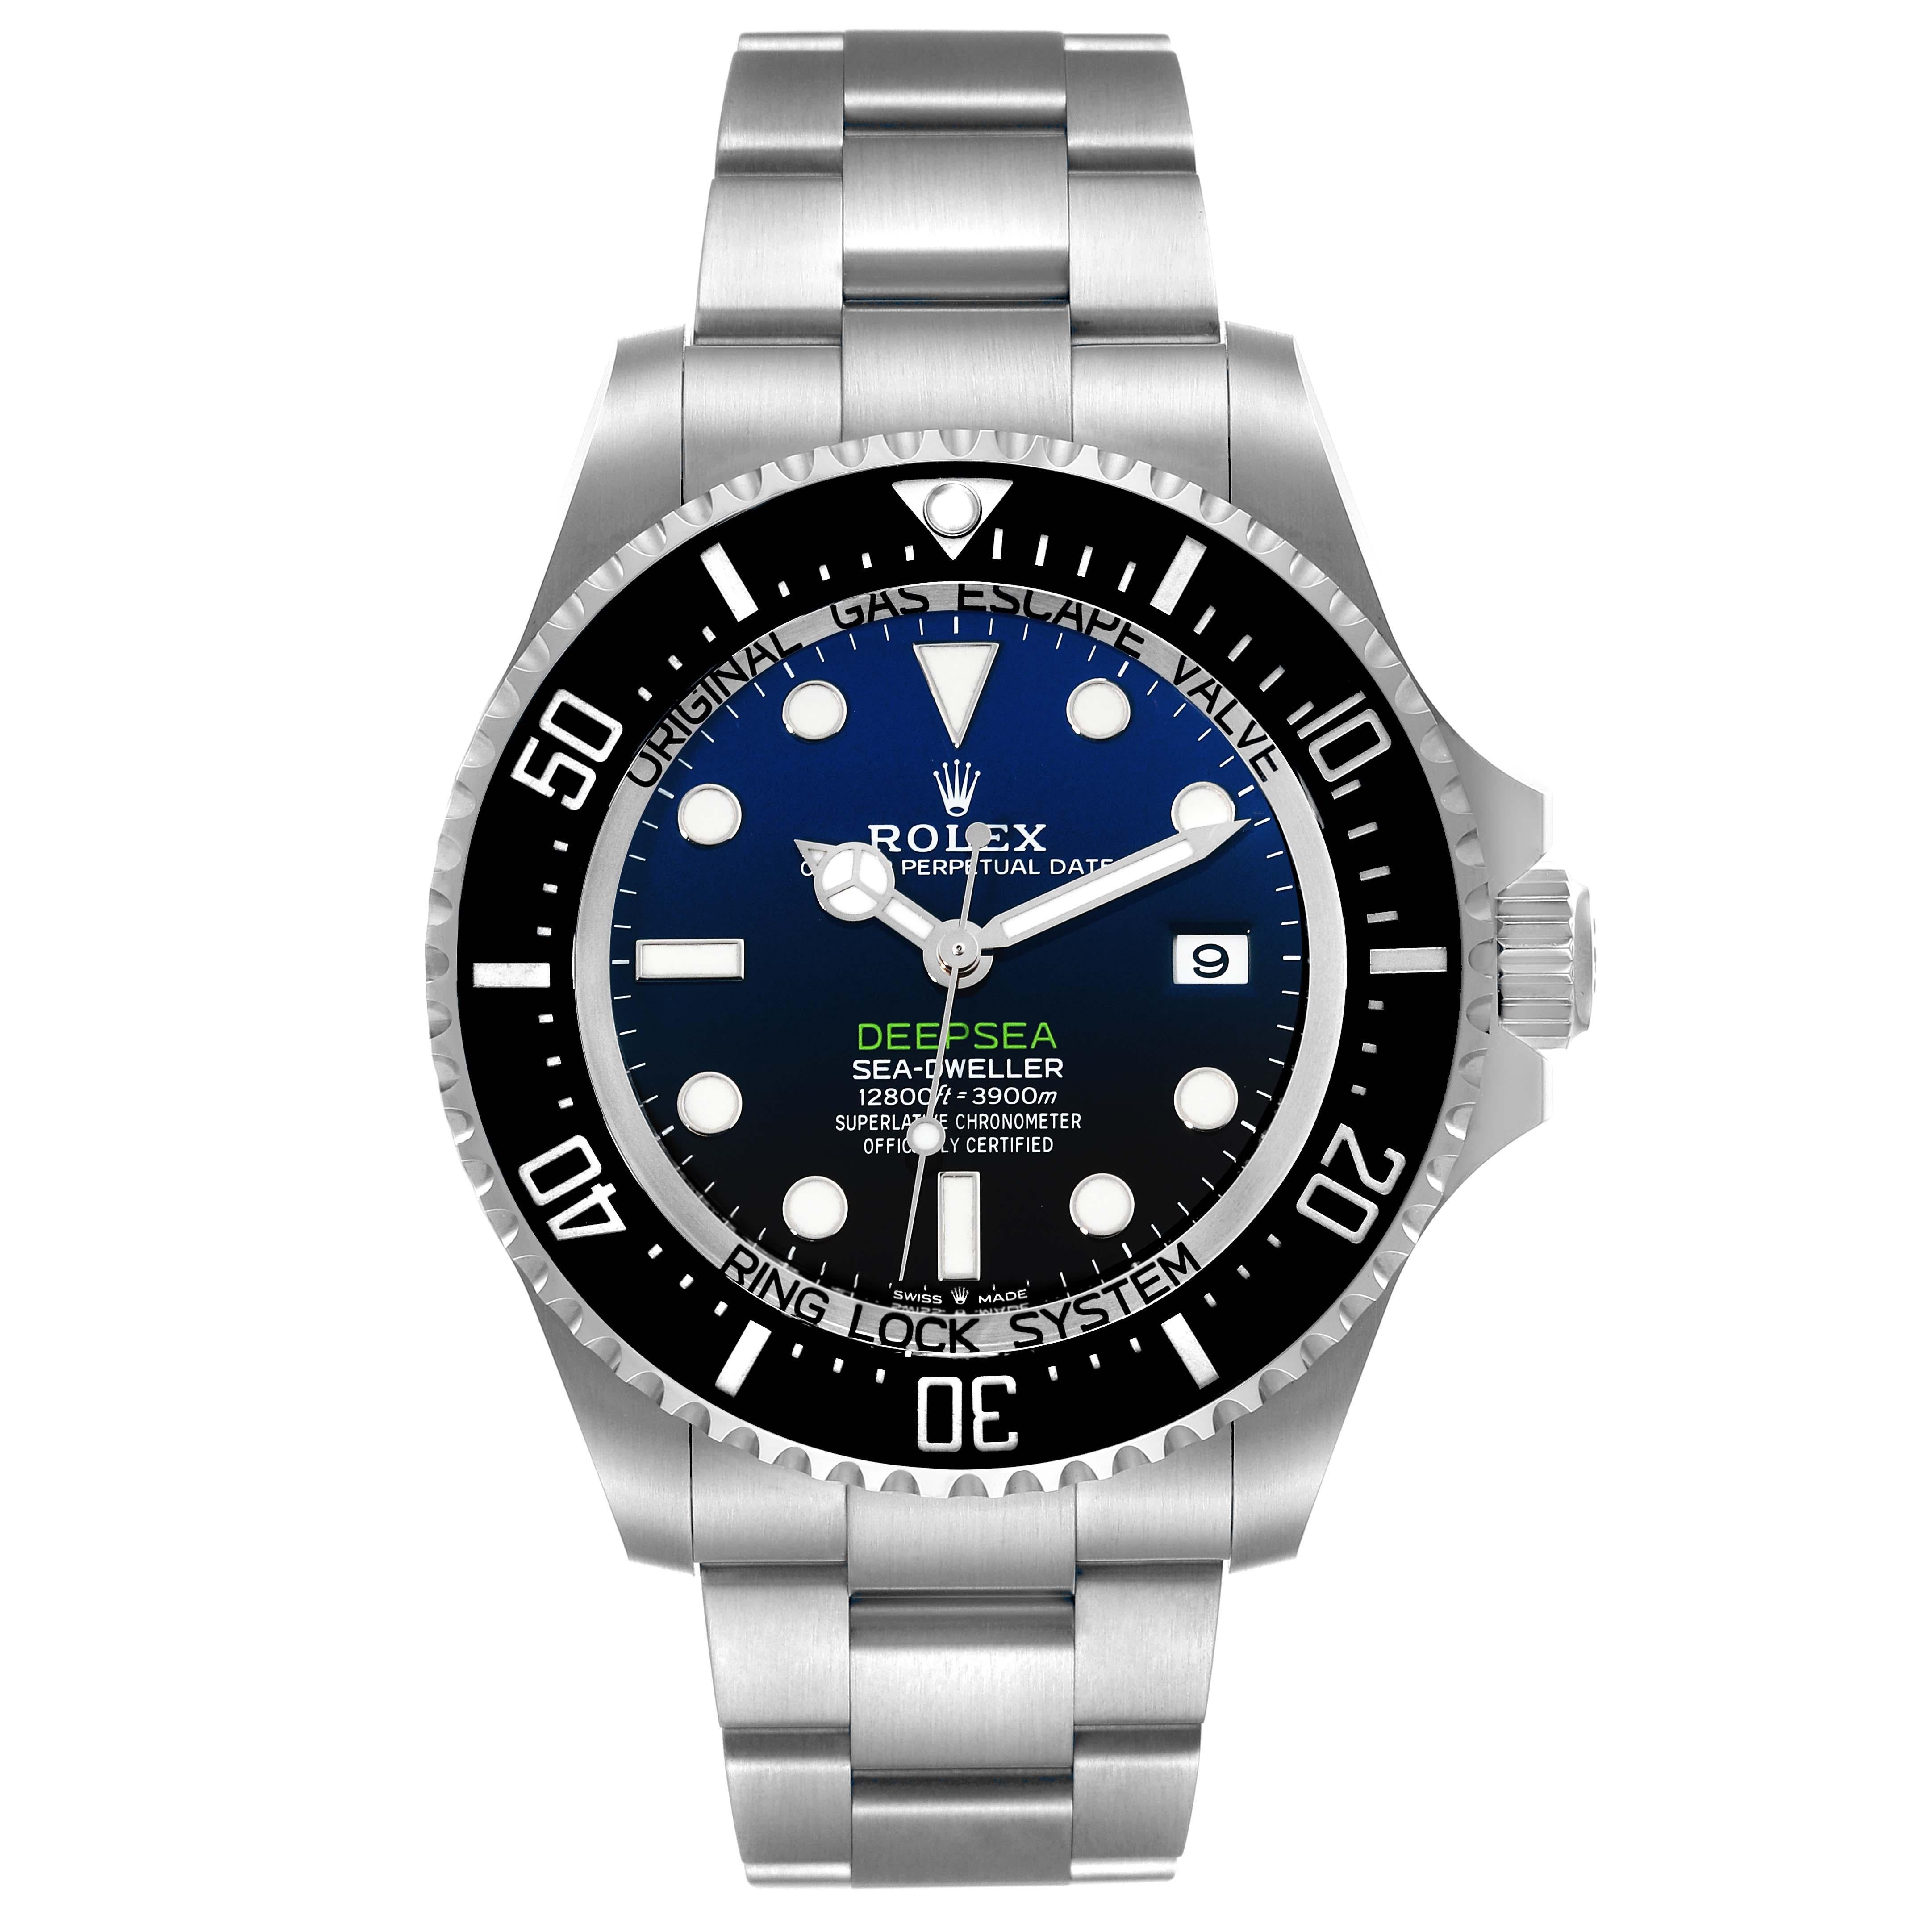 Rolex Seadweller Deepsea 44 Cameron D-Blue Dial Steel Mens Watch 136660 Box Card. Officially certified chronometer automatic self-winding movement. Stainless steel oyster case 44 mm in diameter. Rolex logo on the crown. Special time-lapse